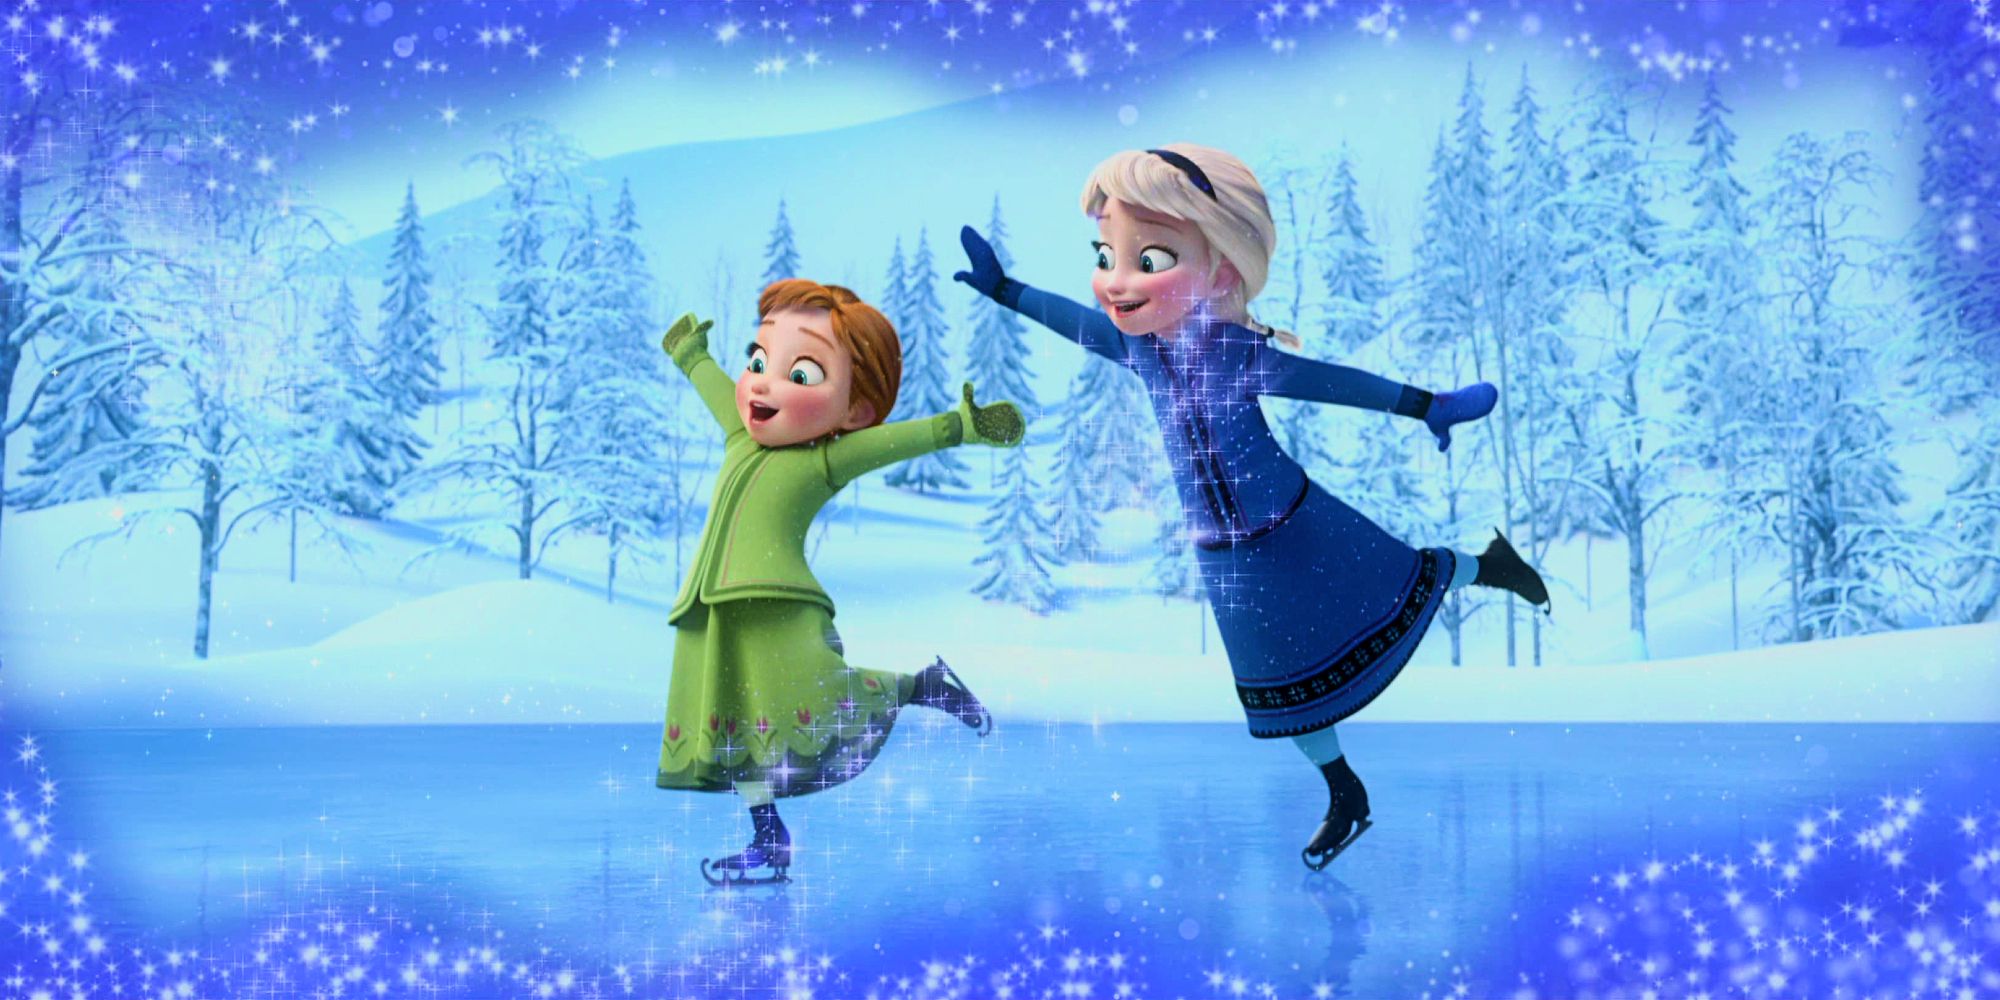 Young Anna and Elsa skating together at the beginning of Frozen.